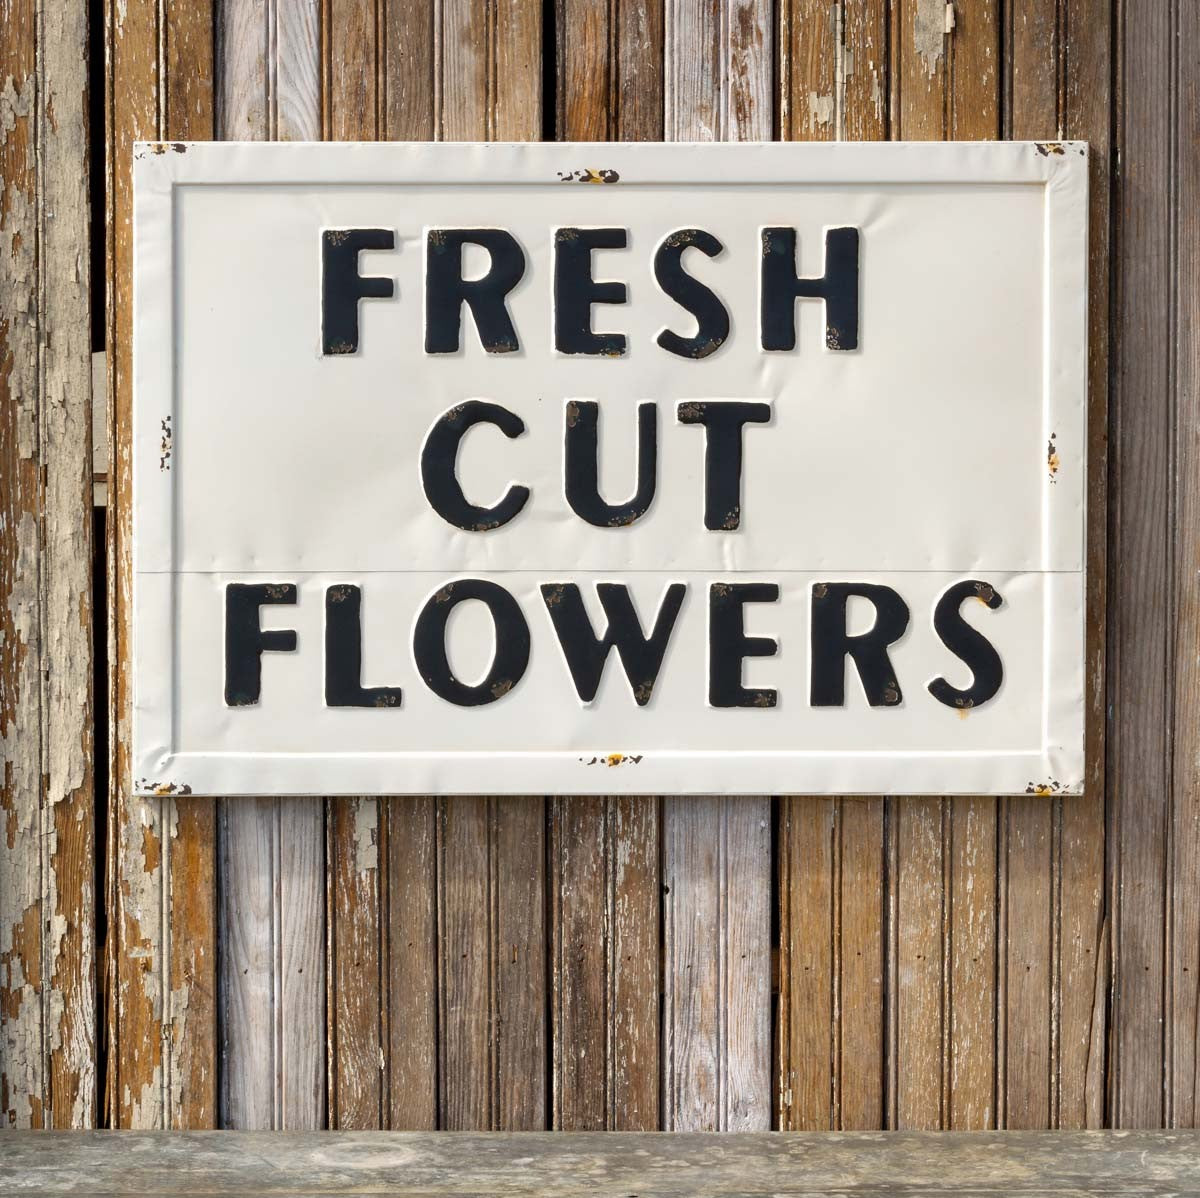 Metal Fresh Cut Flowers Sign: #EWA80544, 28x20 inches sign hung on rustic wooden wall.